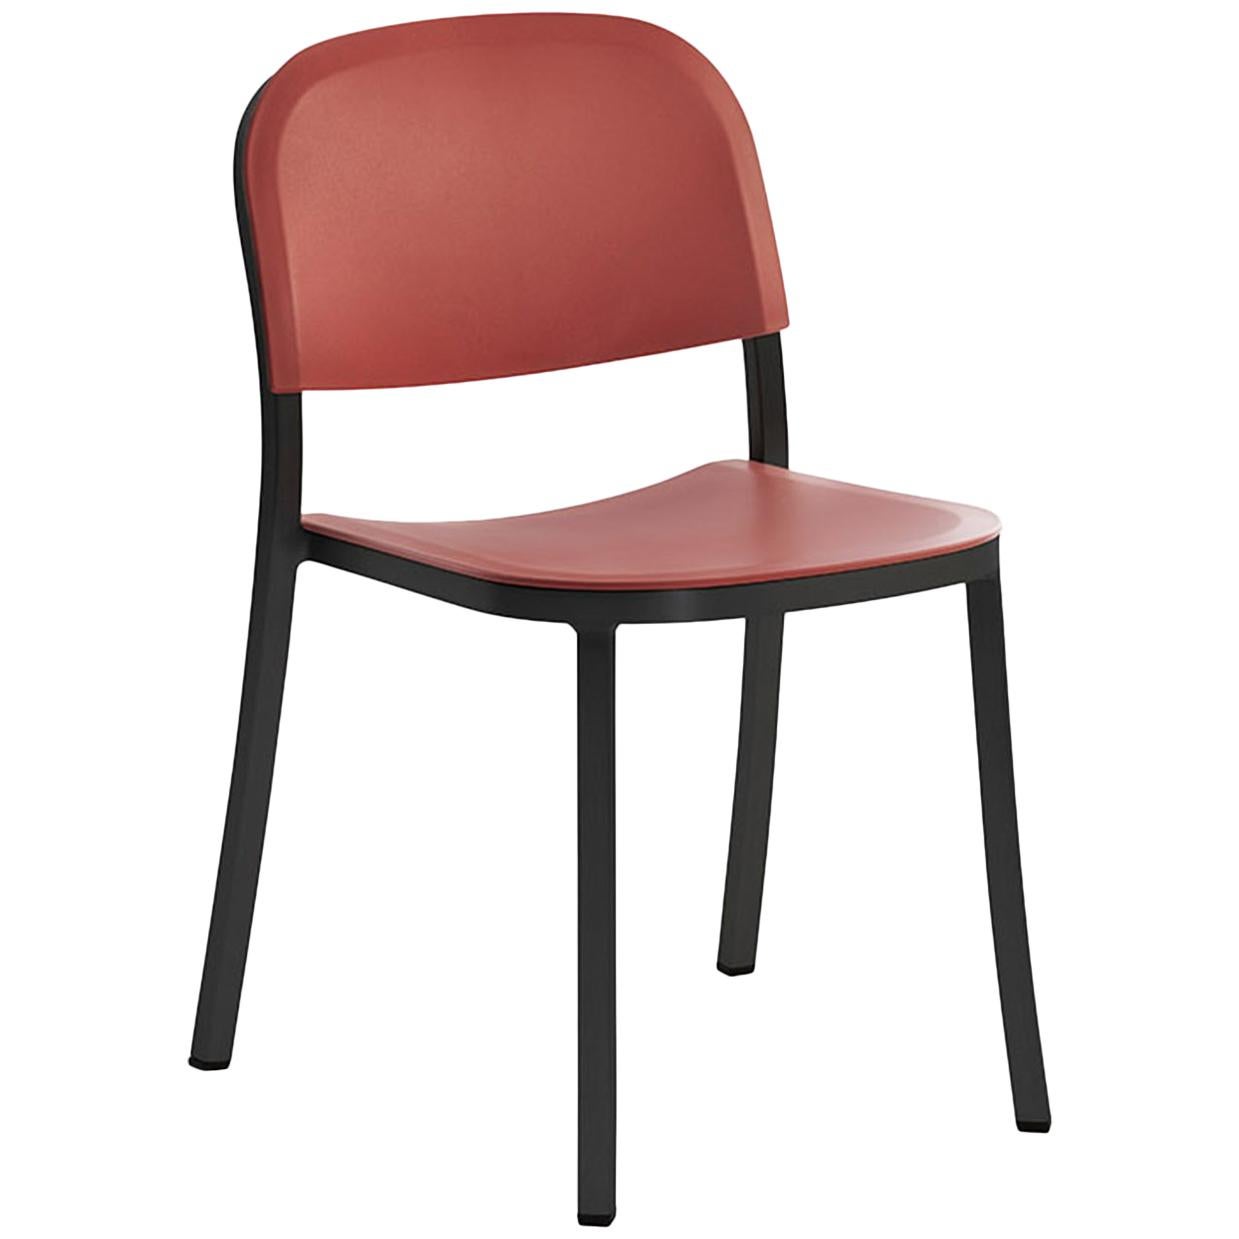 Emeco 1 Inch Stacking Chair in Dark Aluminum and Red Ochre by Jasper Morrison For Sale